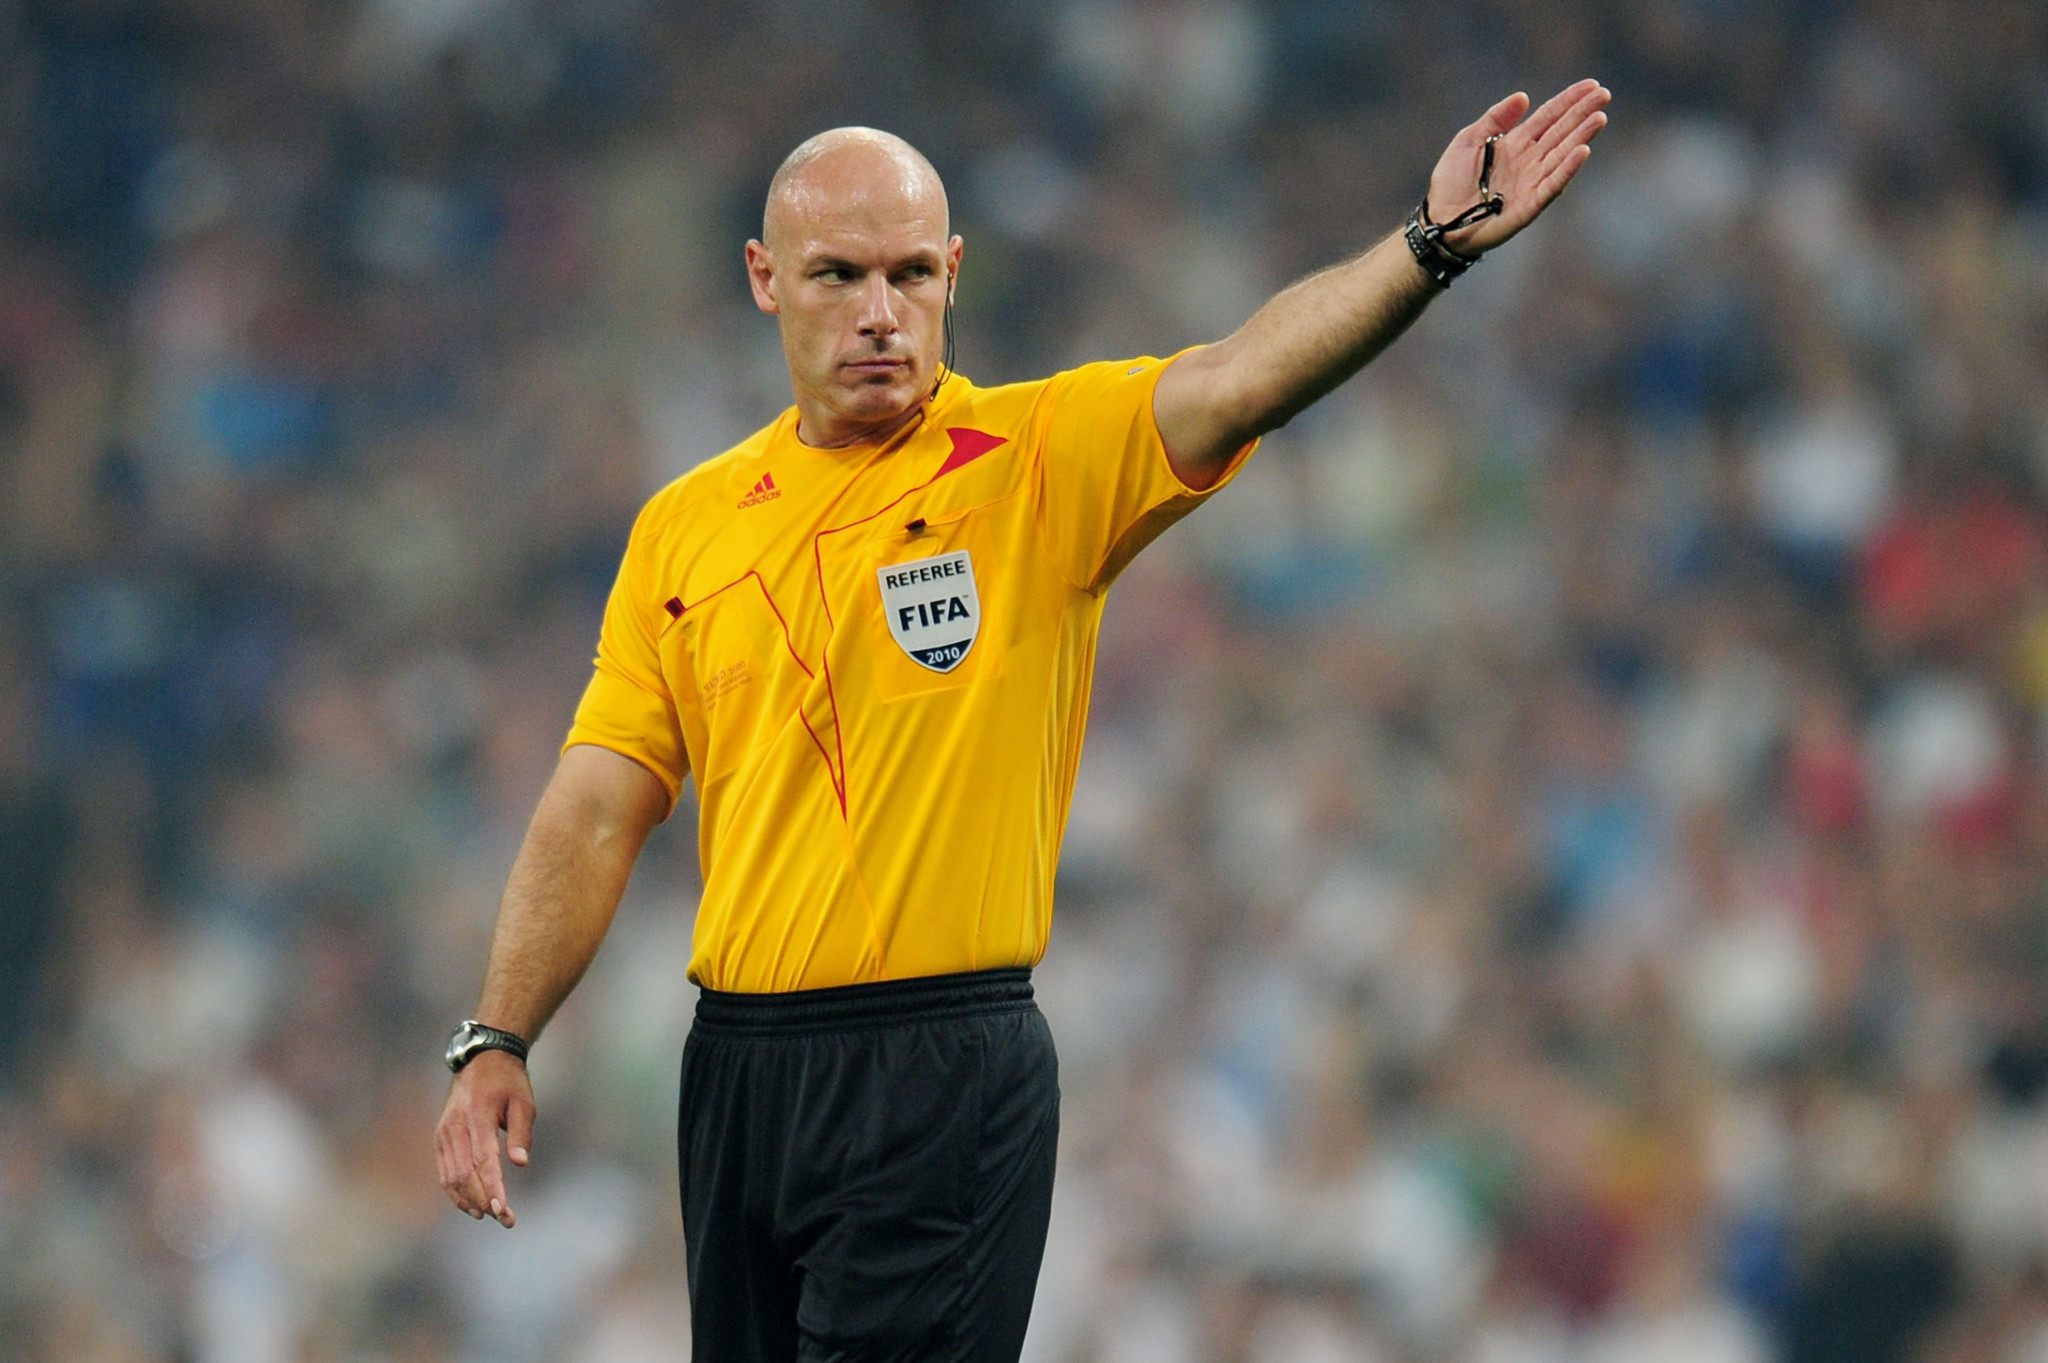 PGMOL chief refereeing office Howard Webb has claimed that a stronger approach is being considered to reduce referee abuse ©Getty Images